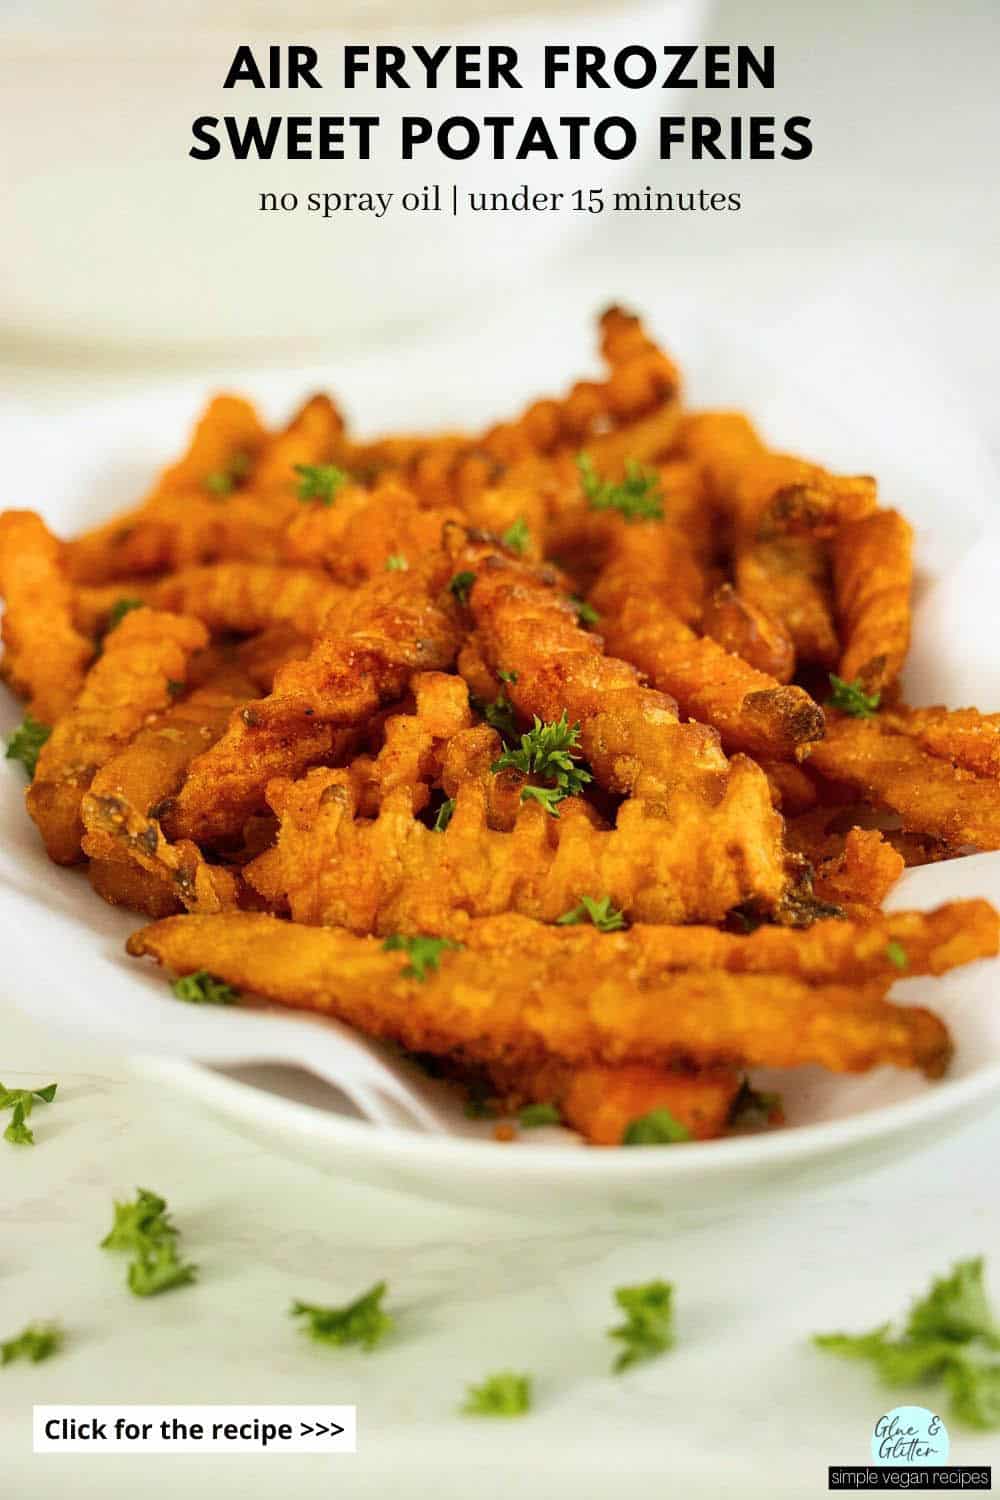 air fryer frozen sweet potato fries on a serving tray after cooking and seasoning, text overlay